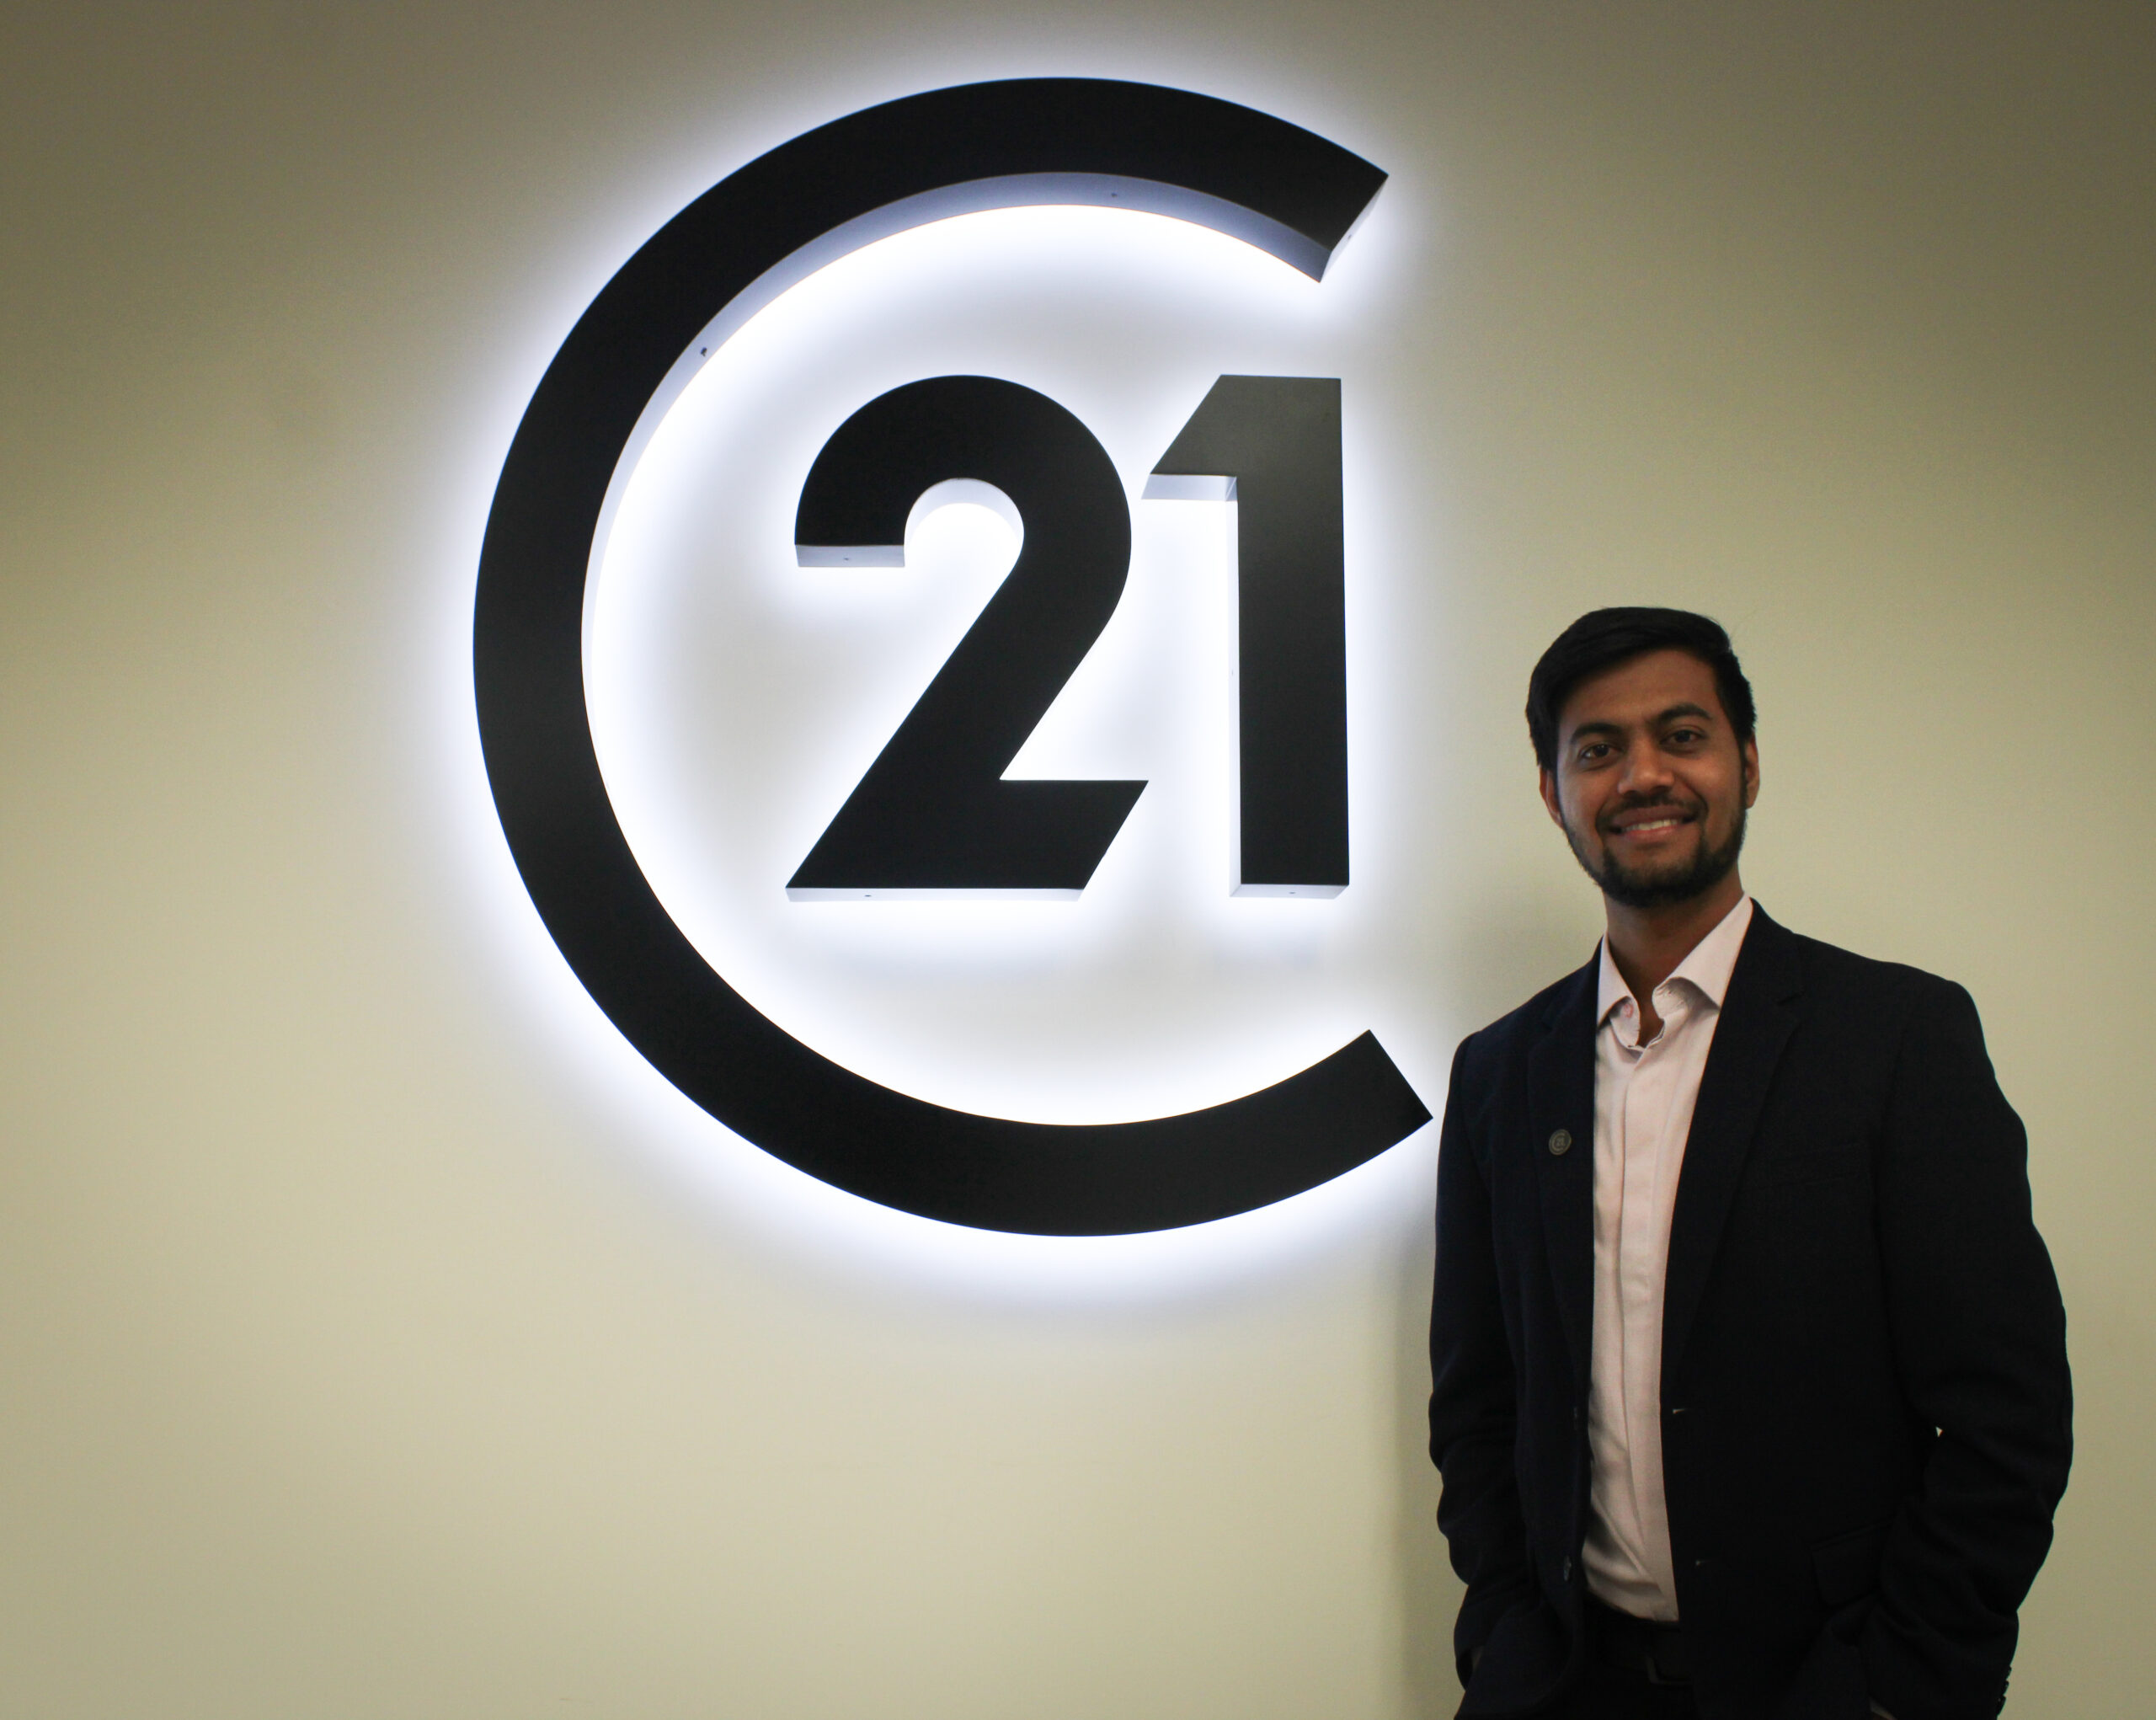 A real estate agent stands in front of Century 21 logo on the wall. He is wearing a black suit and smiling at the camera.